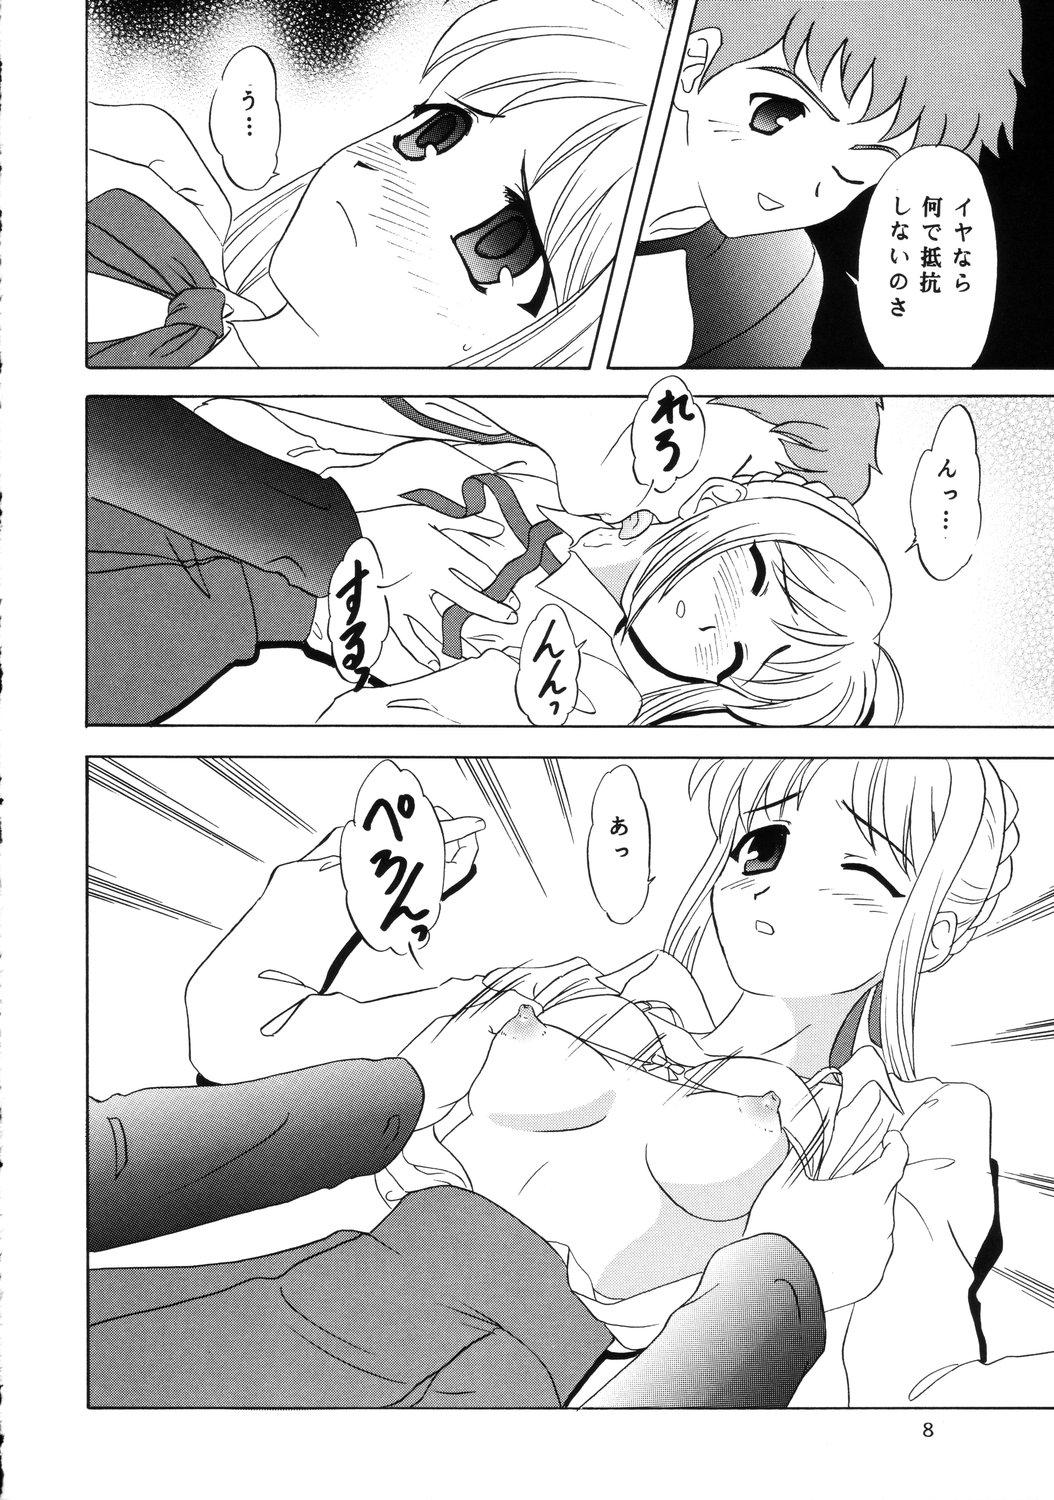 Women Sucking Dick Lunch Box 62 - King's Lunch - Fate stay night Anal Sex - Page 7